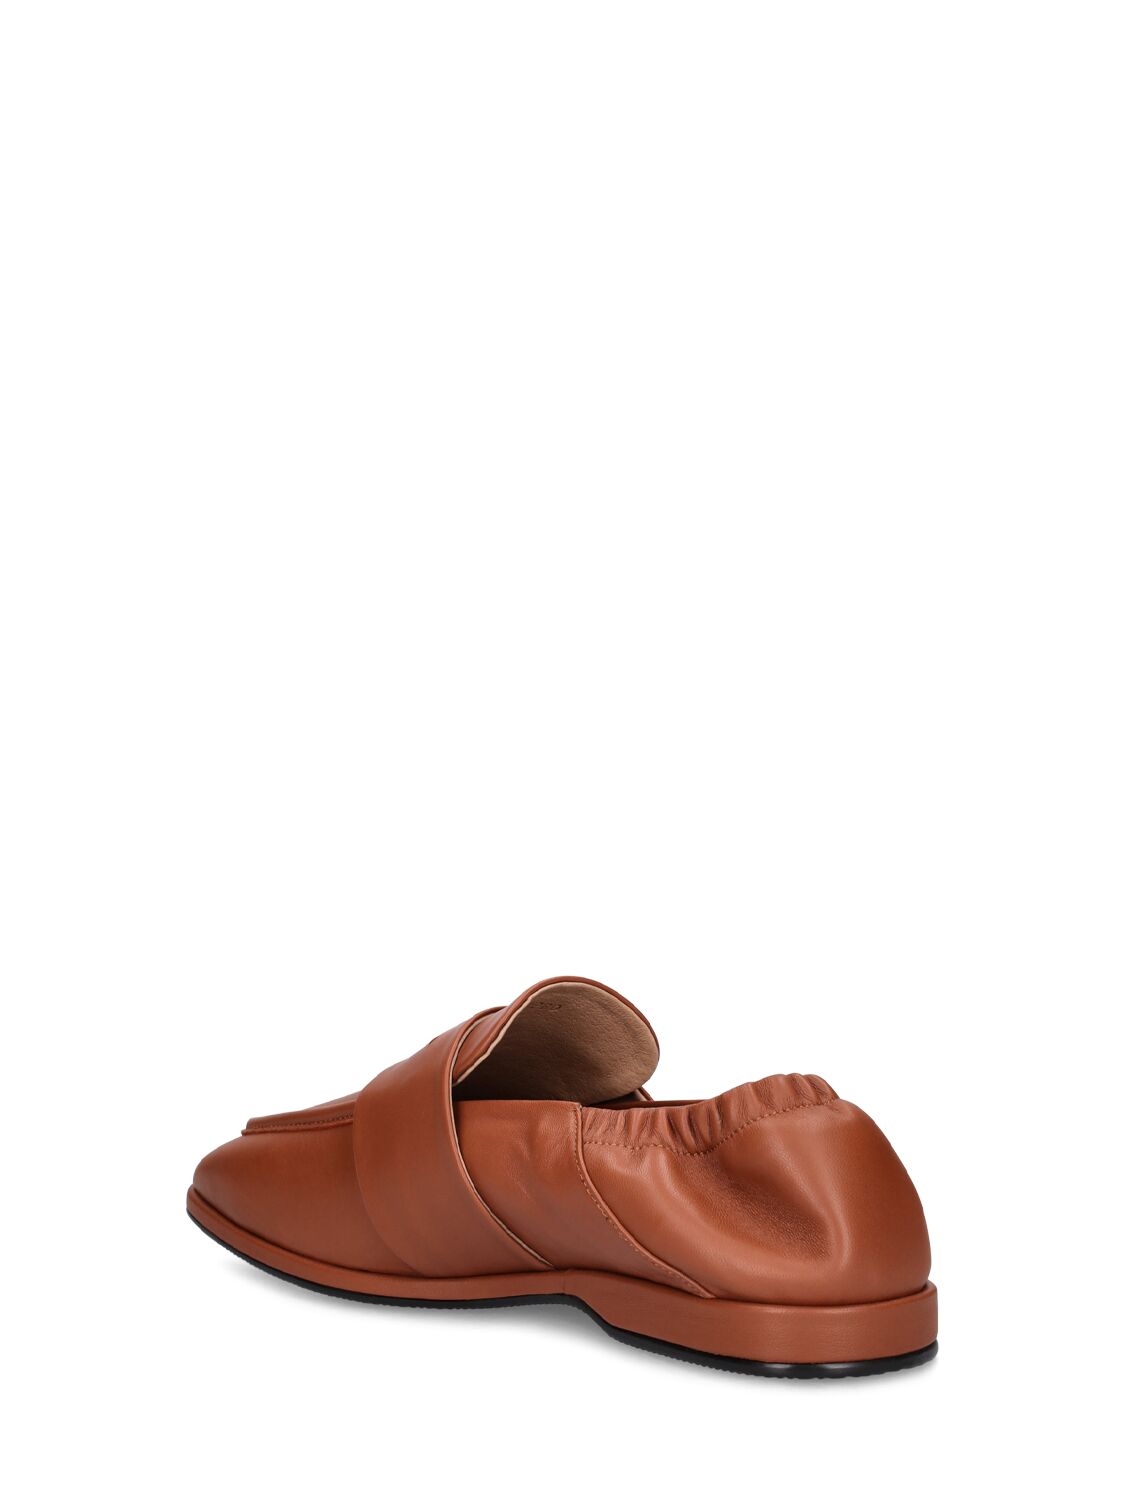 Shop After Pray Square Penny Loafers W/ Band In Tan Brown